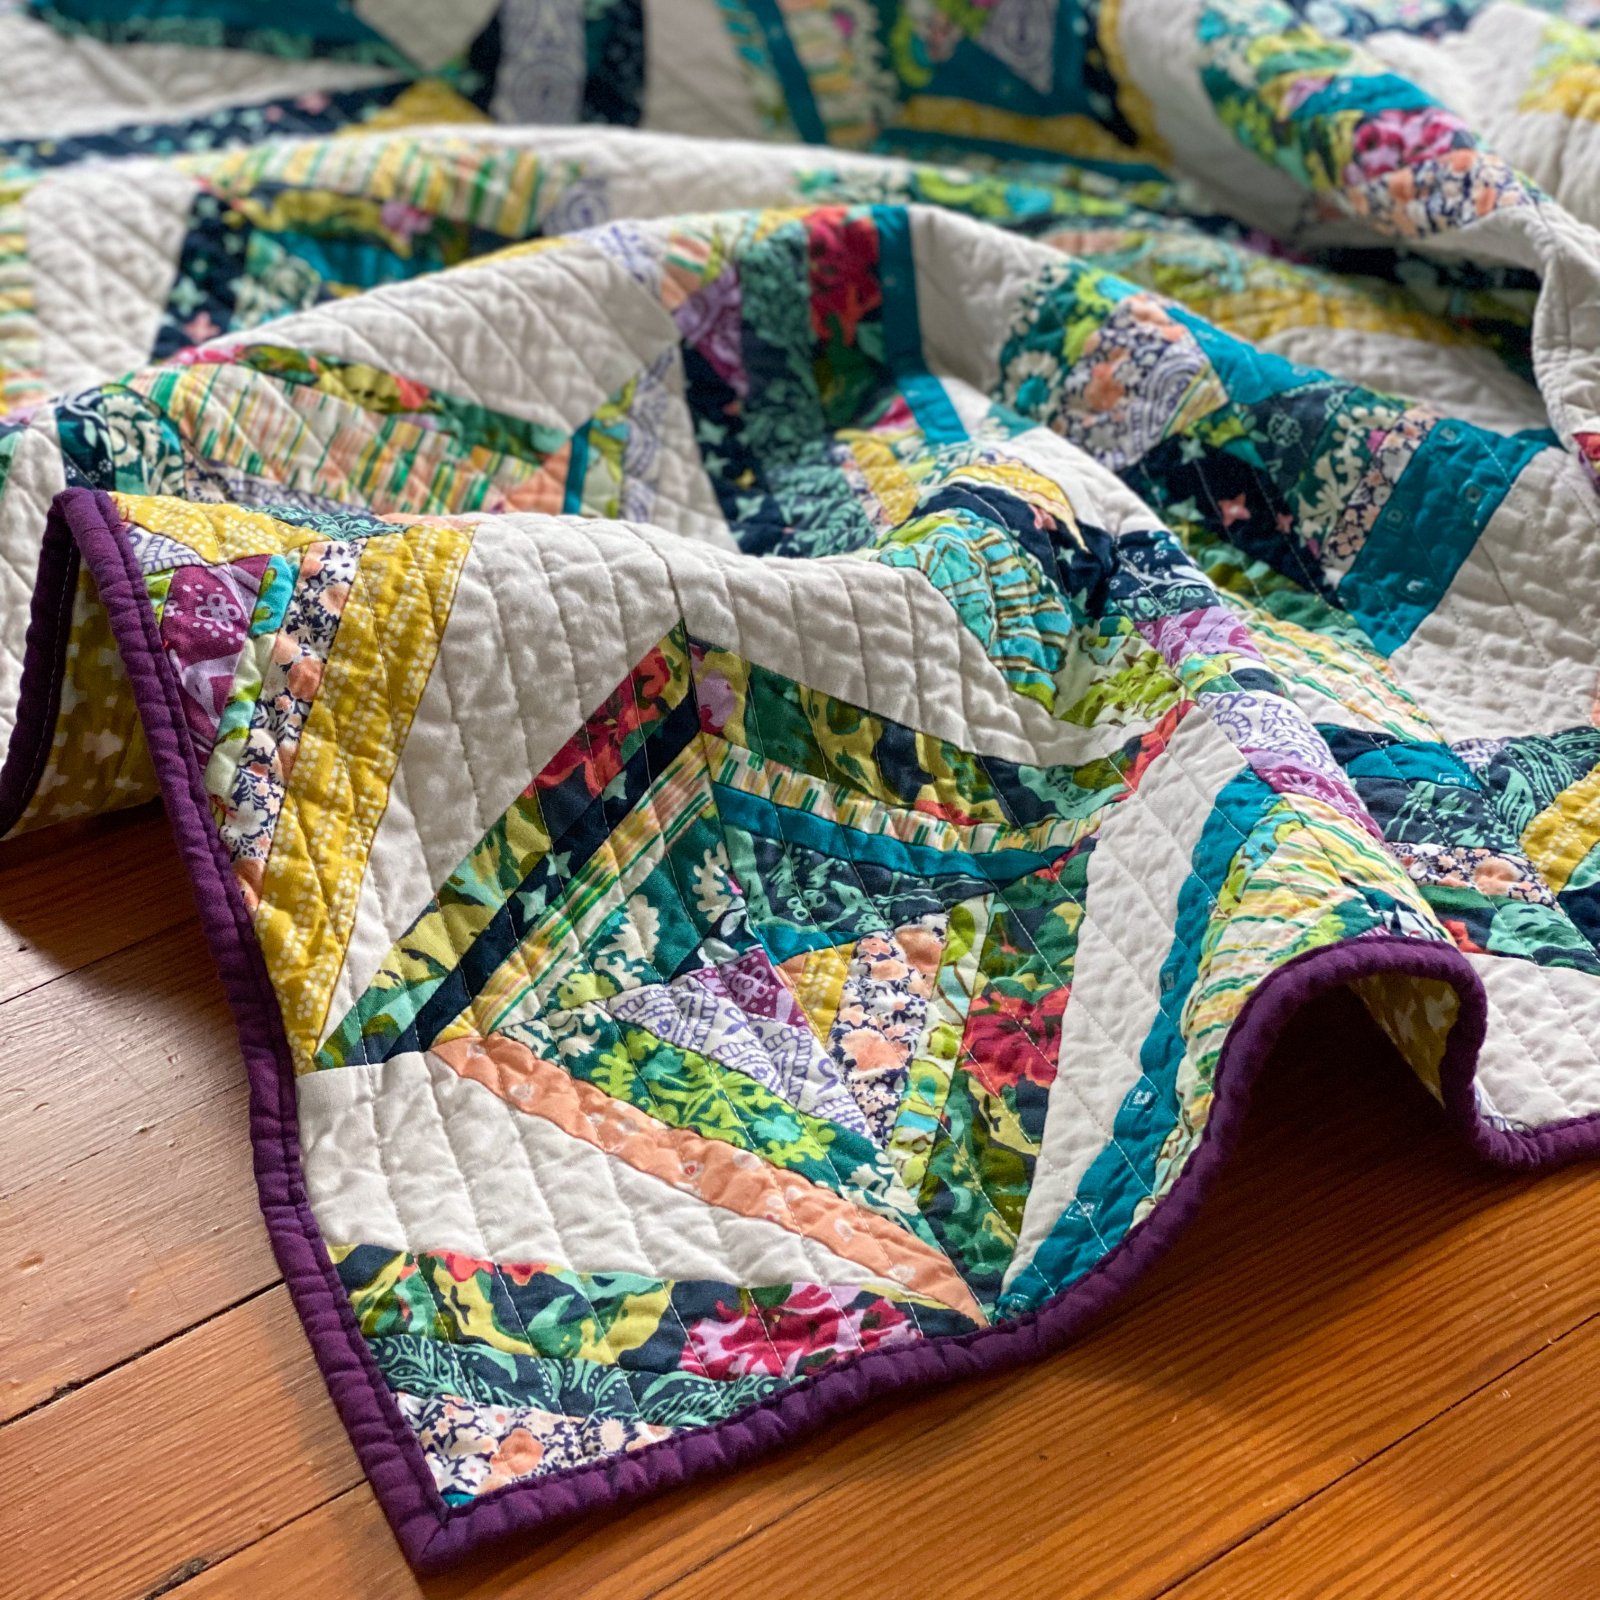 Quilting The Quilt Top